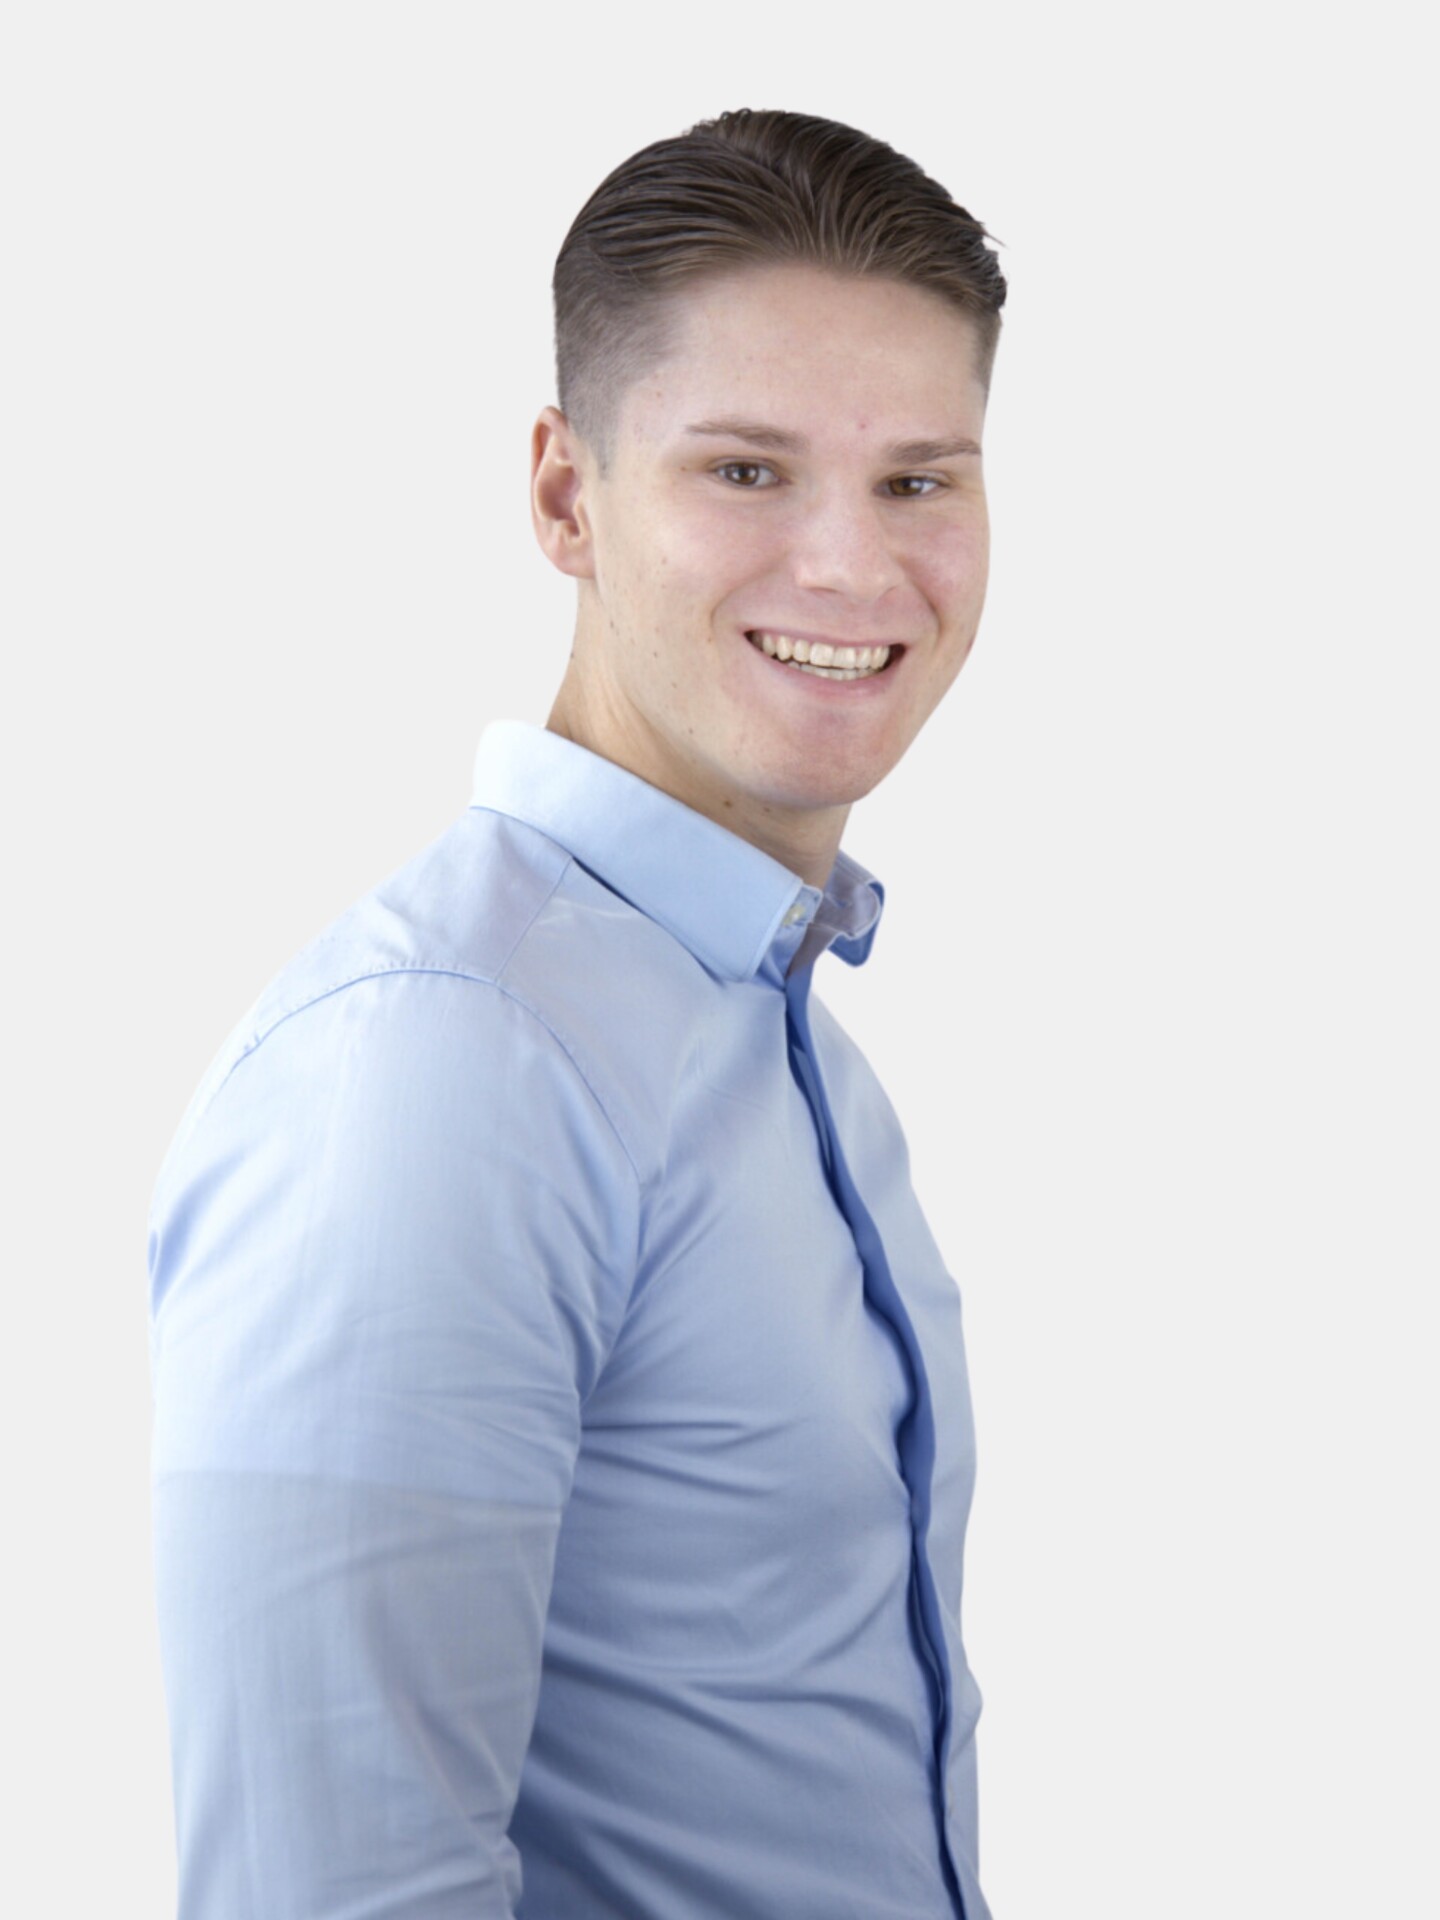 Sander is responsible for Newcorp’s financial administration. In his spare time, he does a lot of sports and fills his weekends with going out with friends.